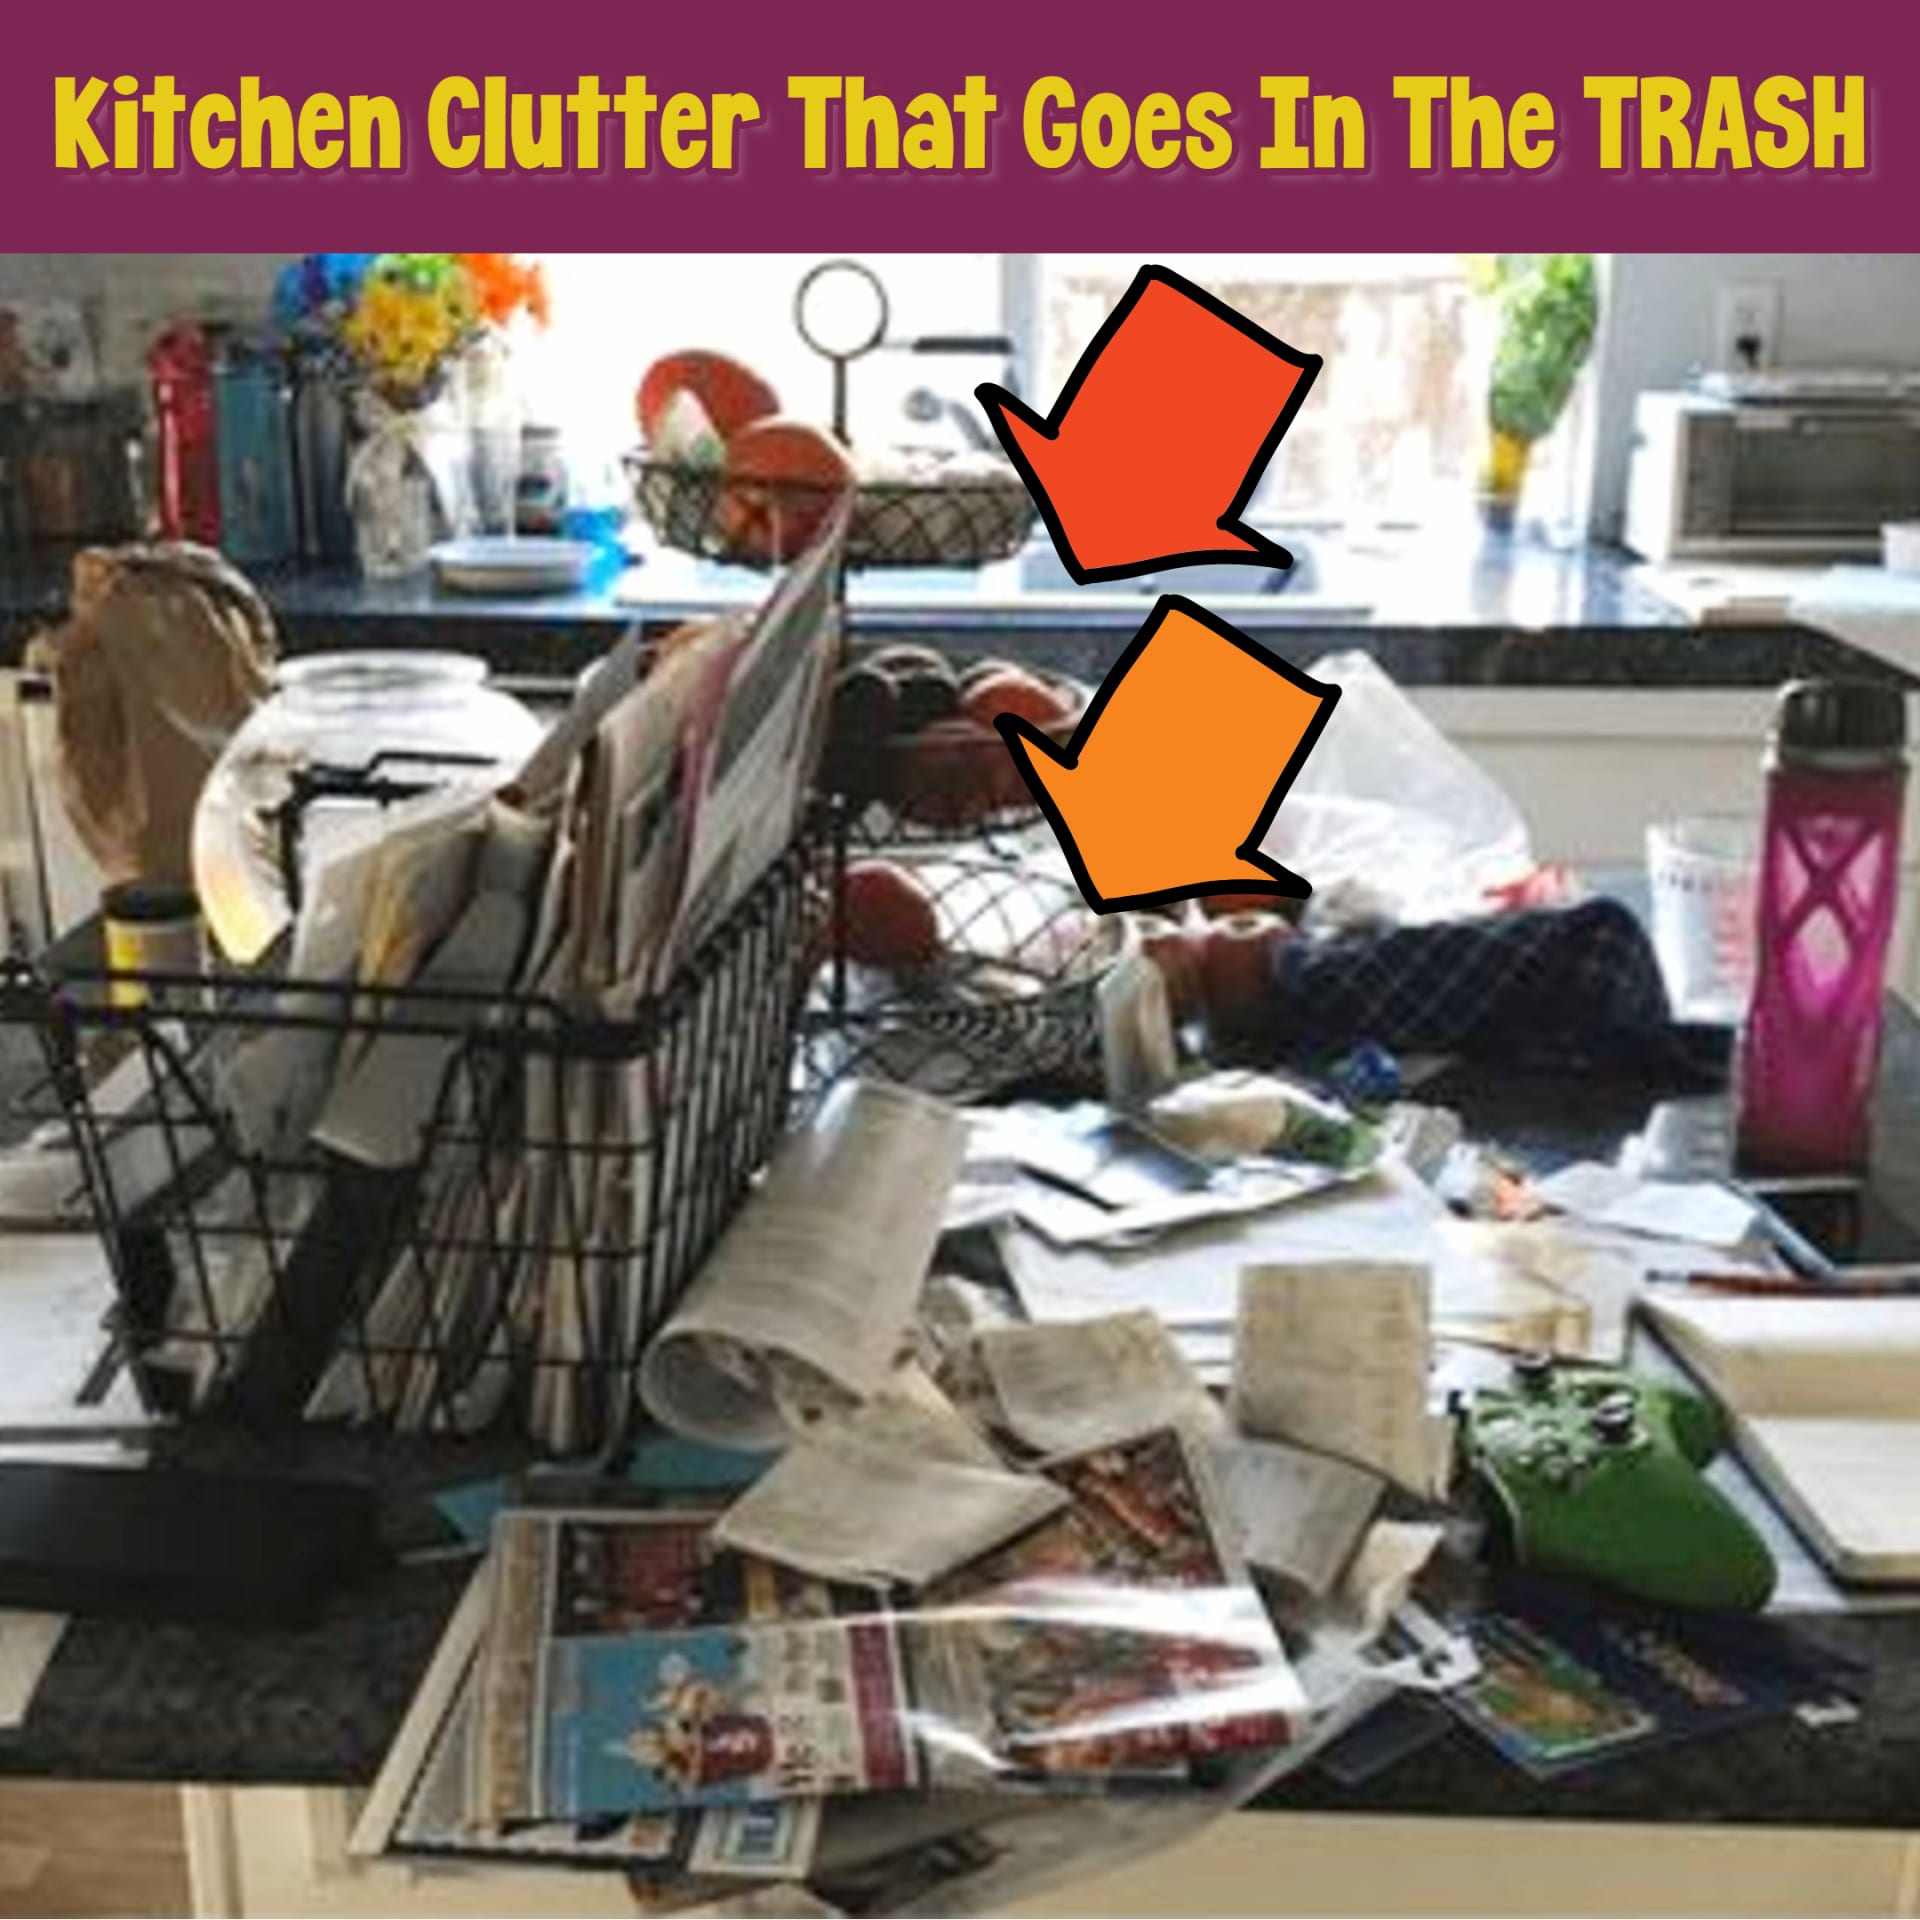 declutter kitchen counters and countertops with these easy DIY kitchen clutter solutions